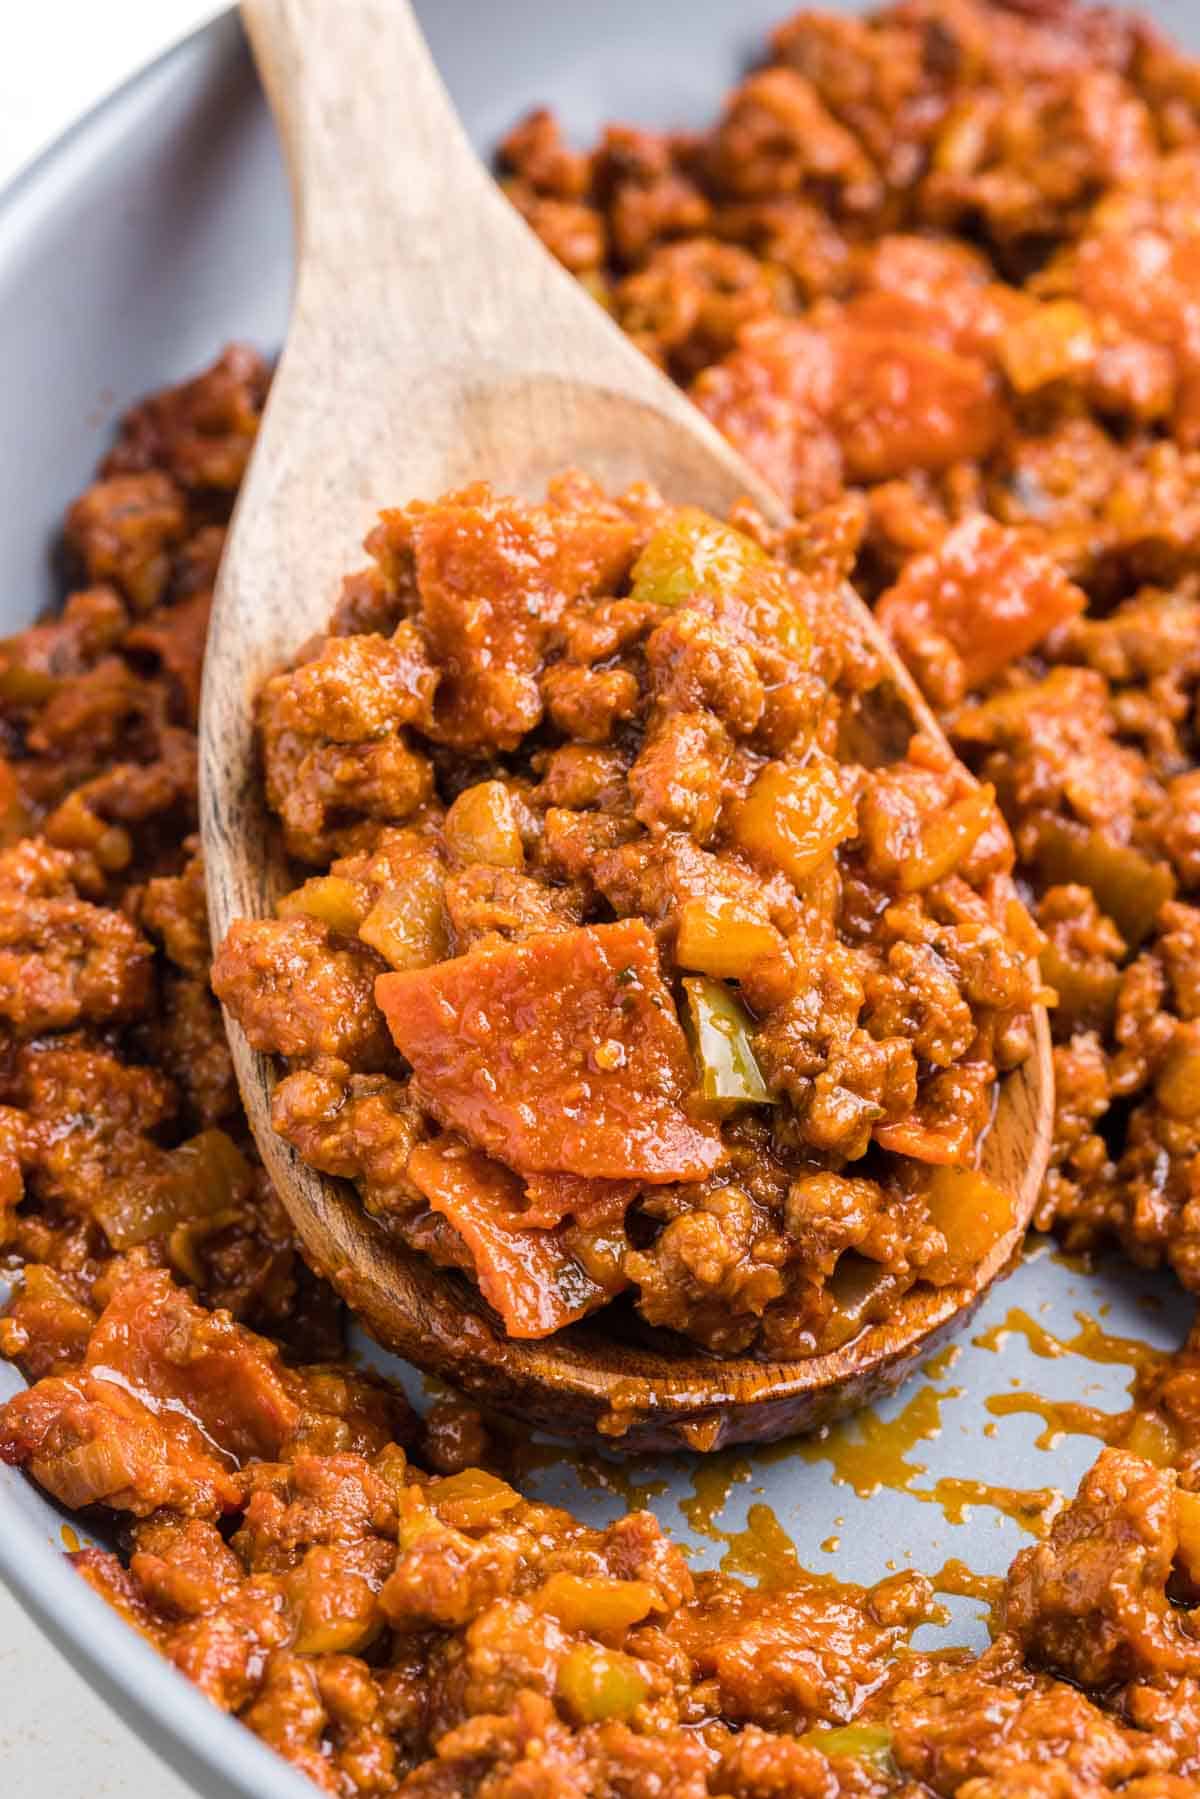 A skillet of pizza sloppy joes with a wooden spoon removing a scoop.